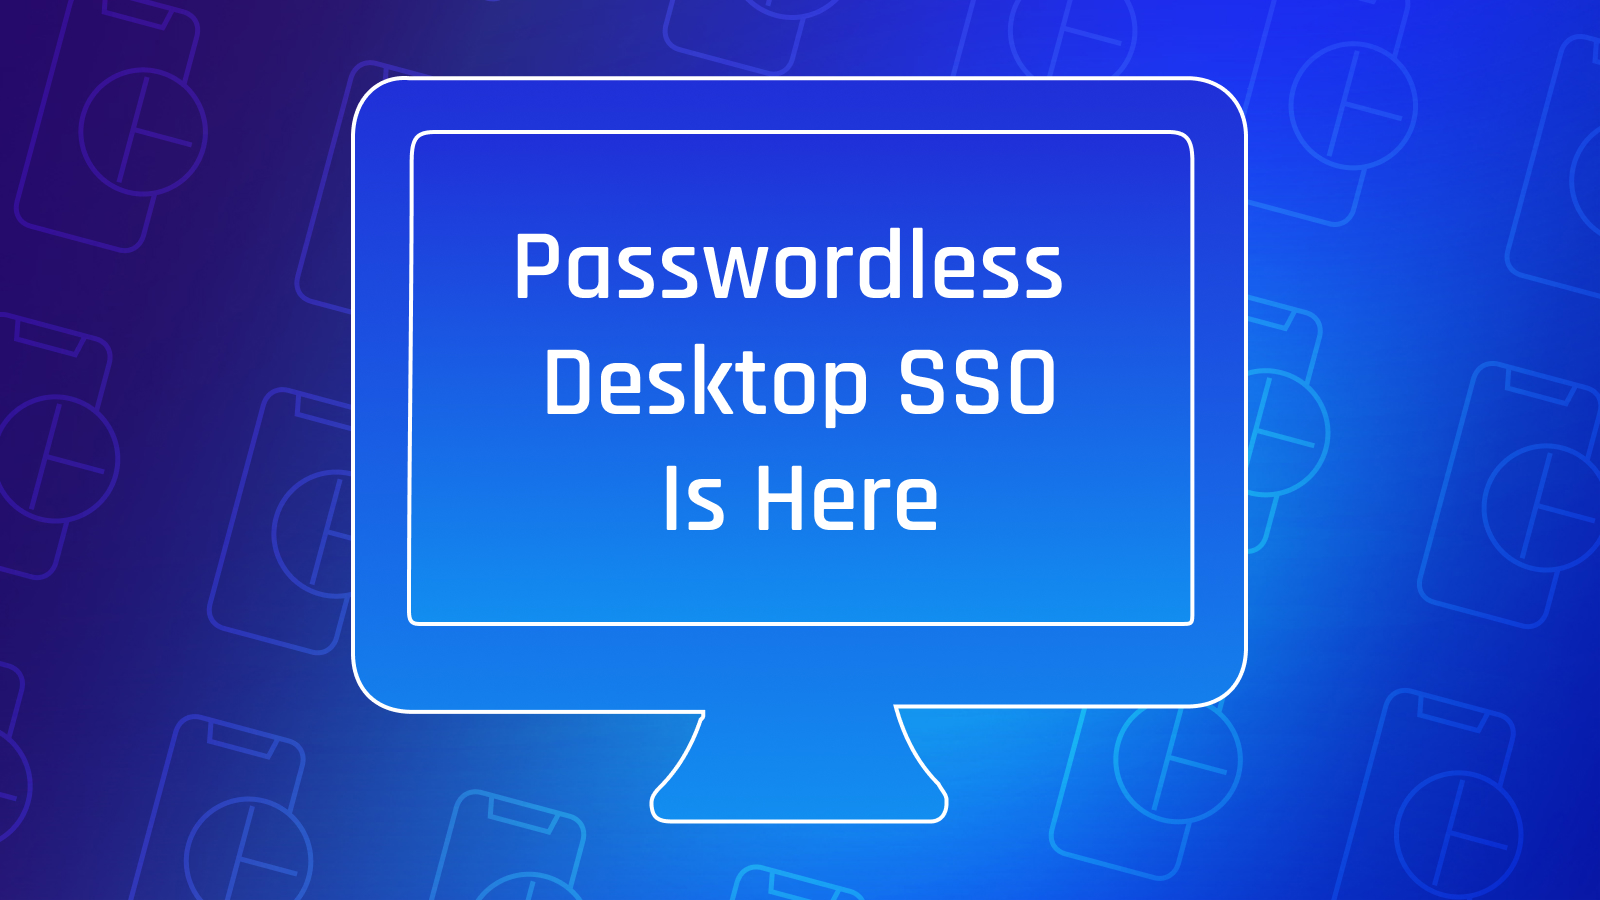 How to Simplify Authentication with Passwordless Desktop SSO